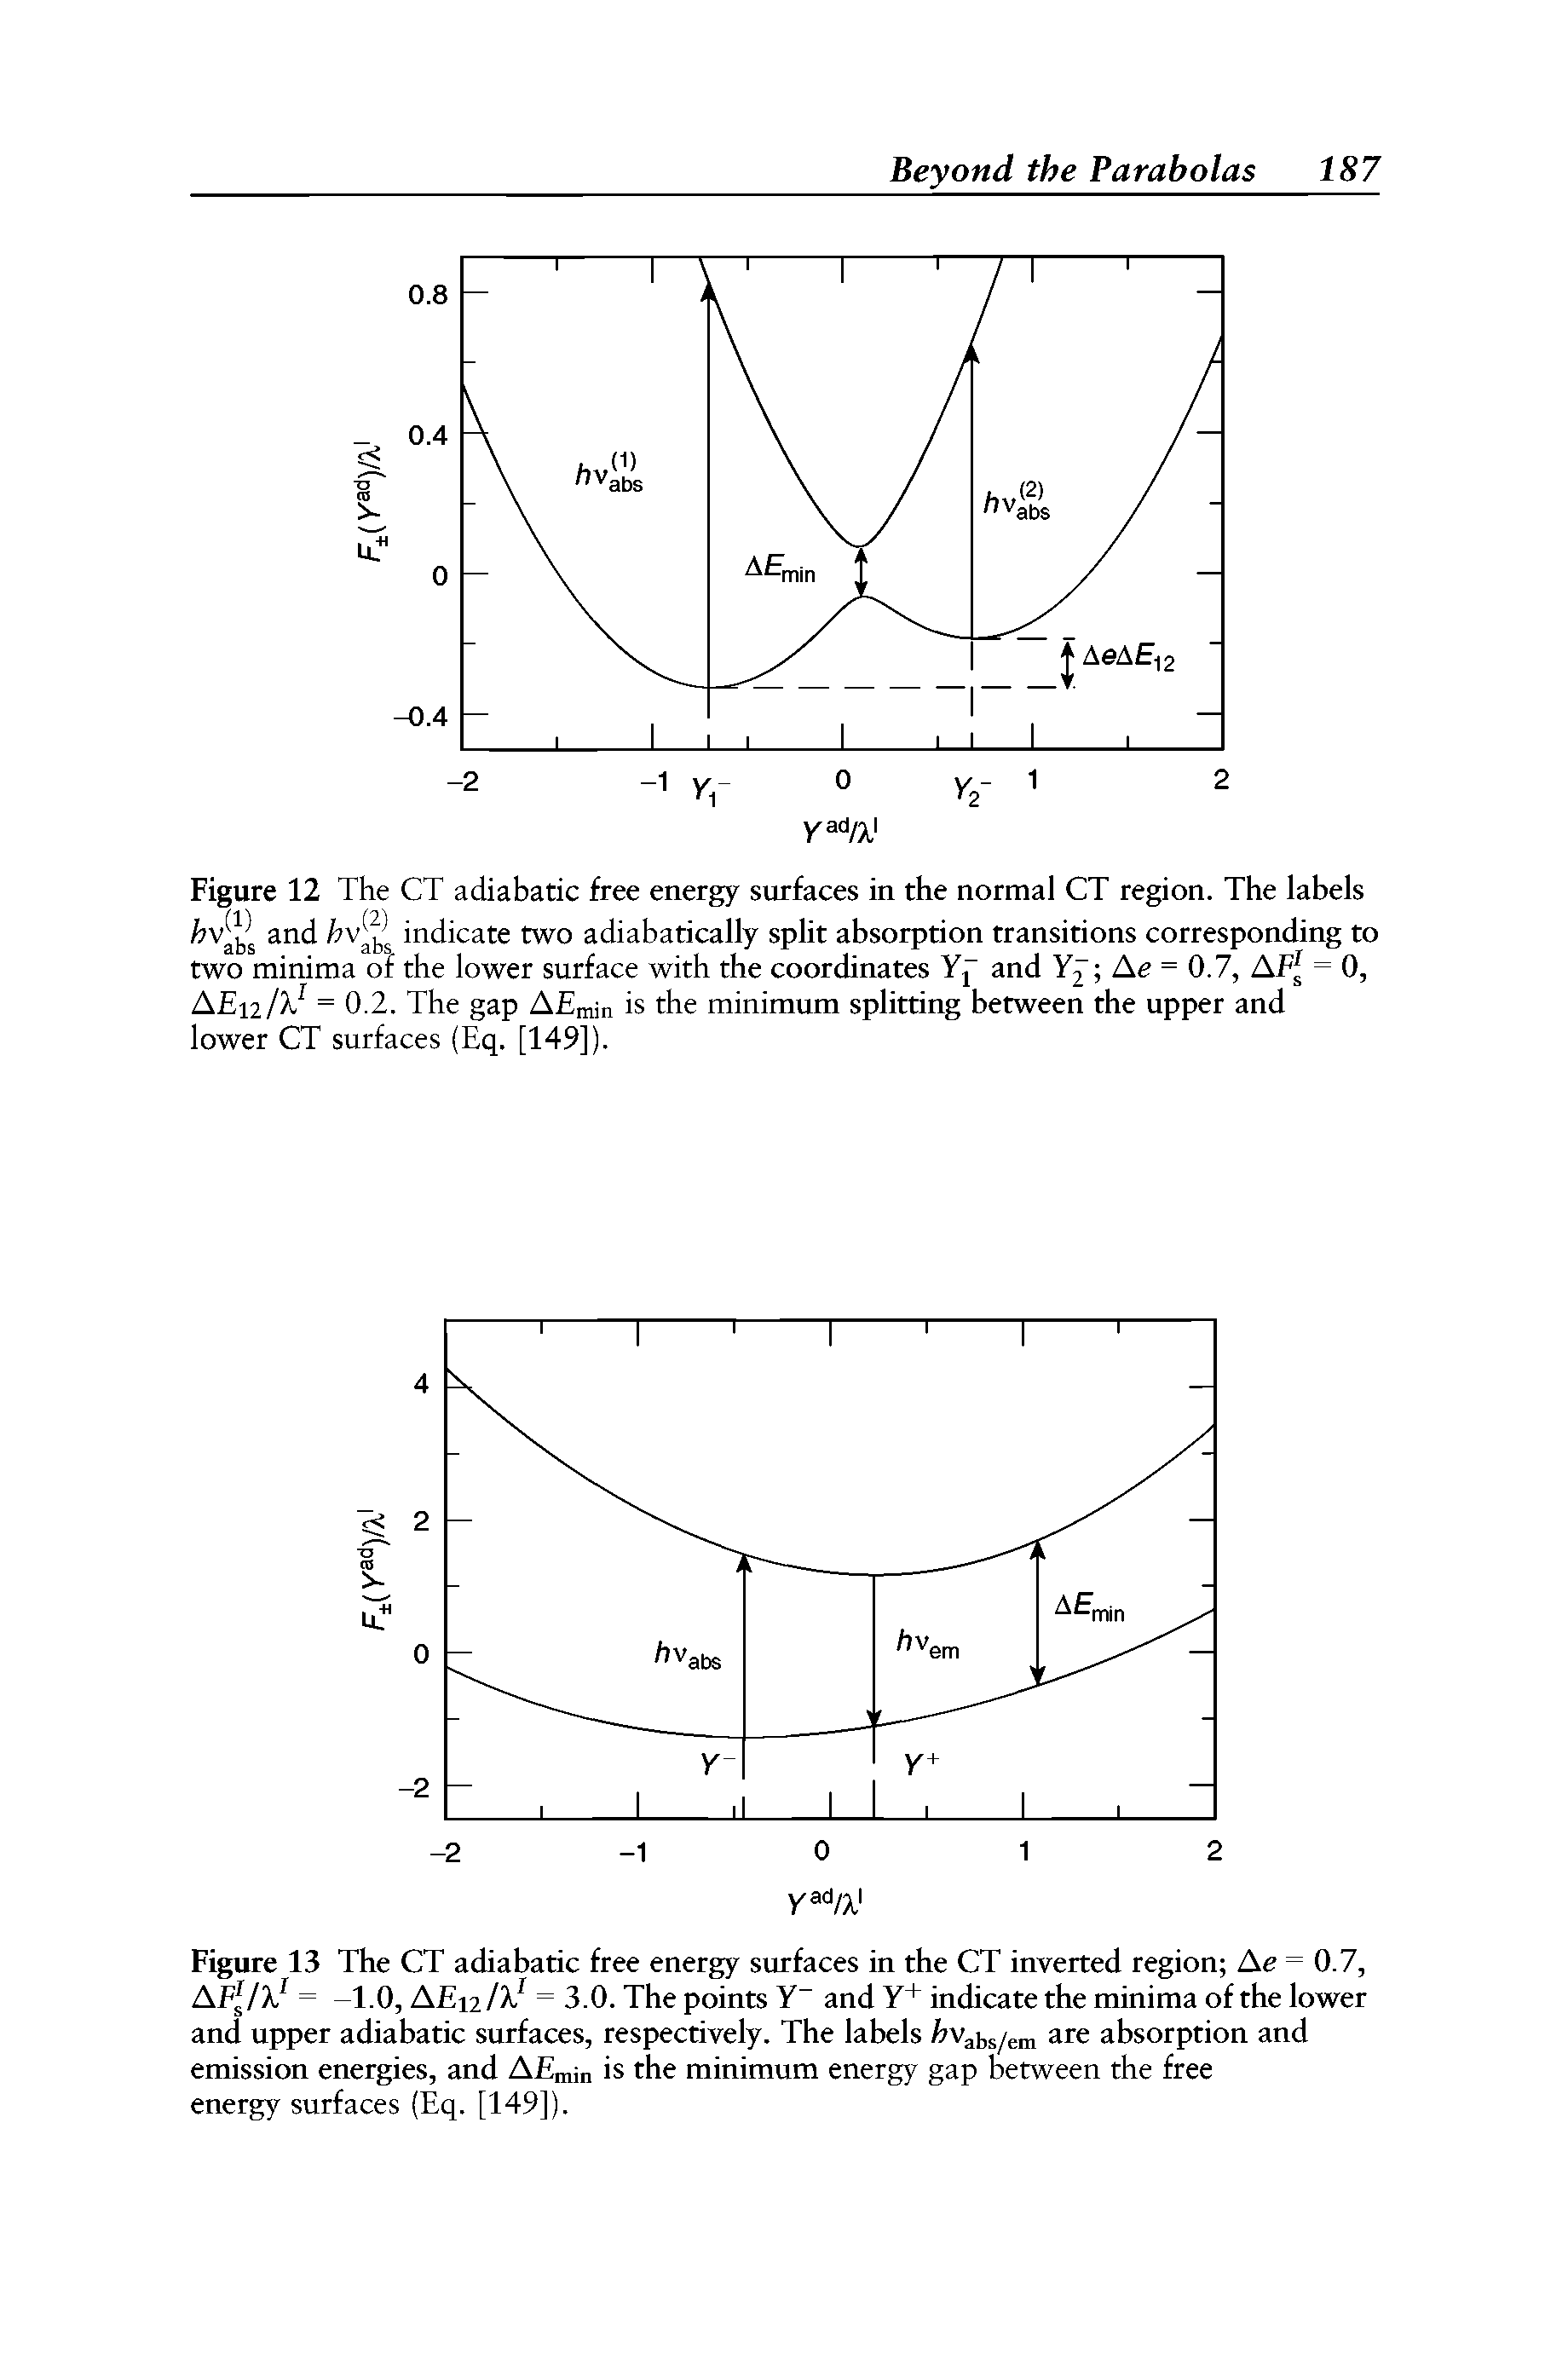 Figure 12 The CT adiabatic free energy surfaces in the normal CT region. The labels and indicate two adiabatically split absorption transitions corresponding to two minima of the lower surface with the coordinates Yj and Y Ae = 0.7, AFl = 0, AEnlyJ = 0.2. The gap AEmin is the minimum splitting between the upper and lower CT surfaces (Eq. [149]).